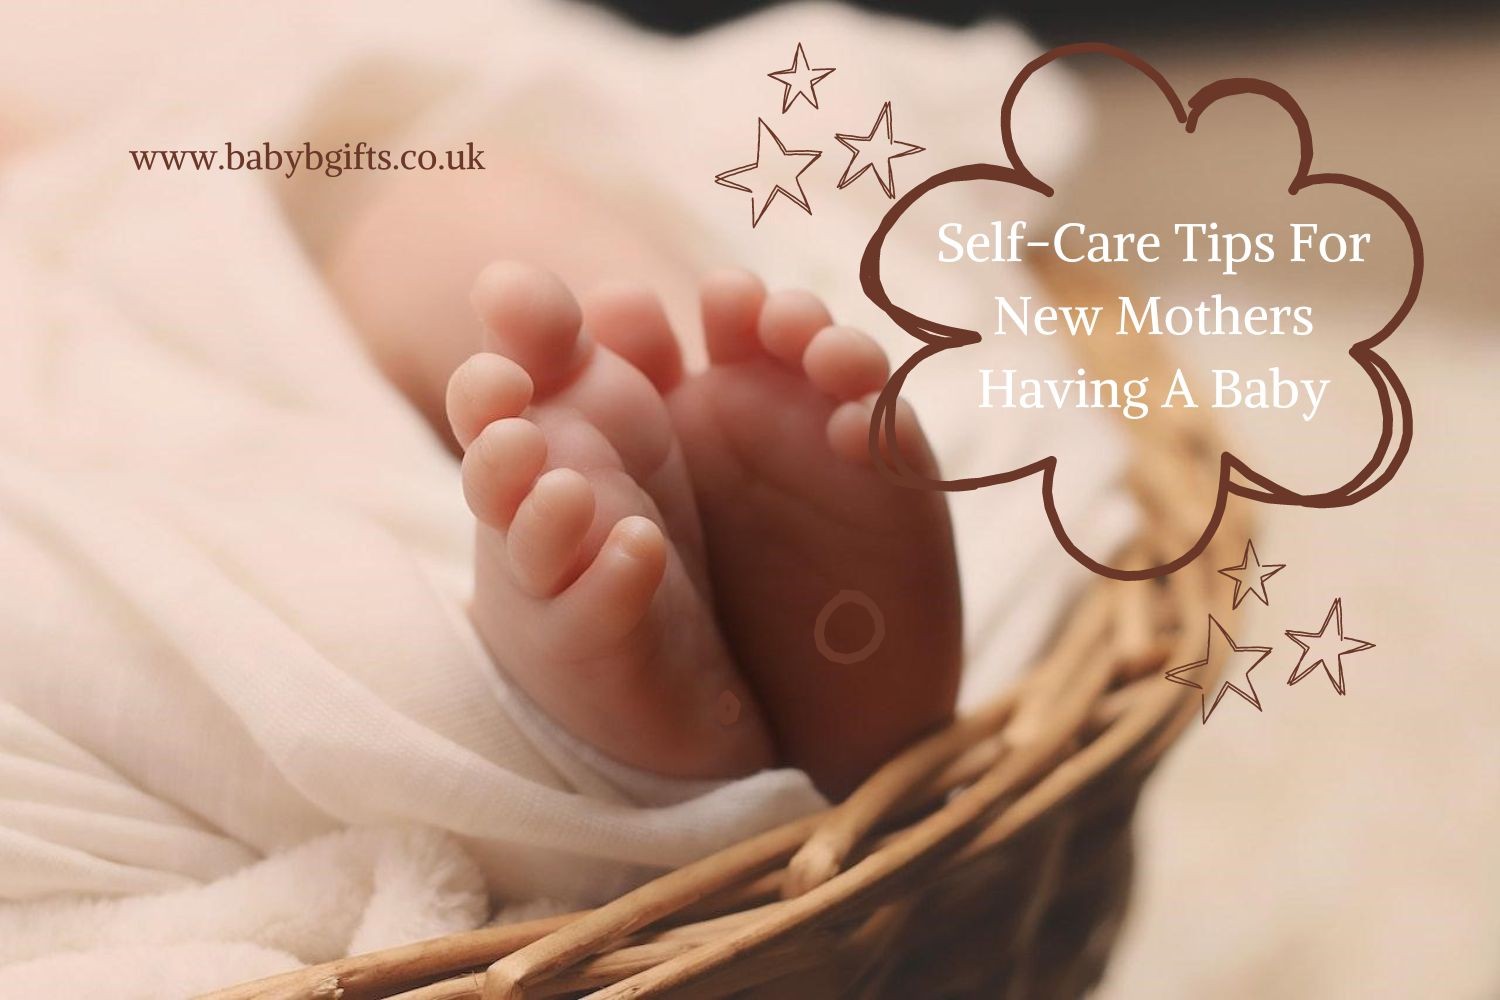 4 Self-Care Tips For New Mothers Having A Baby